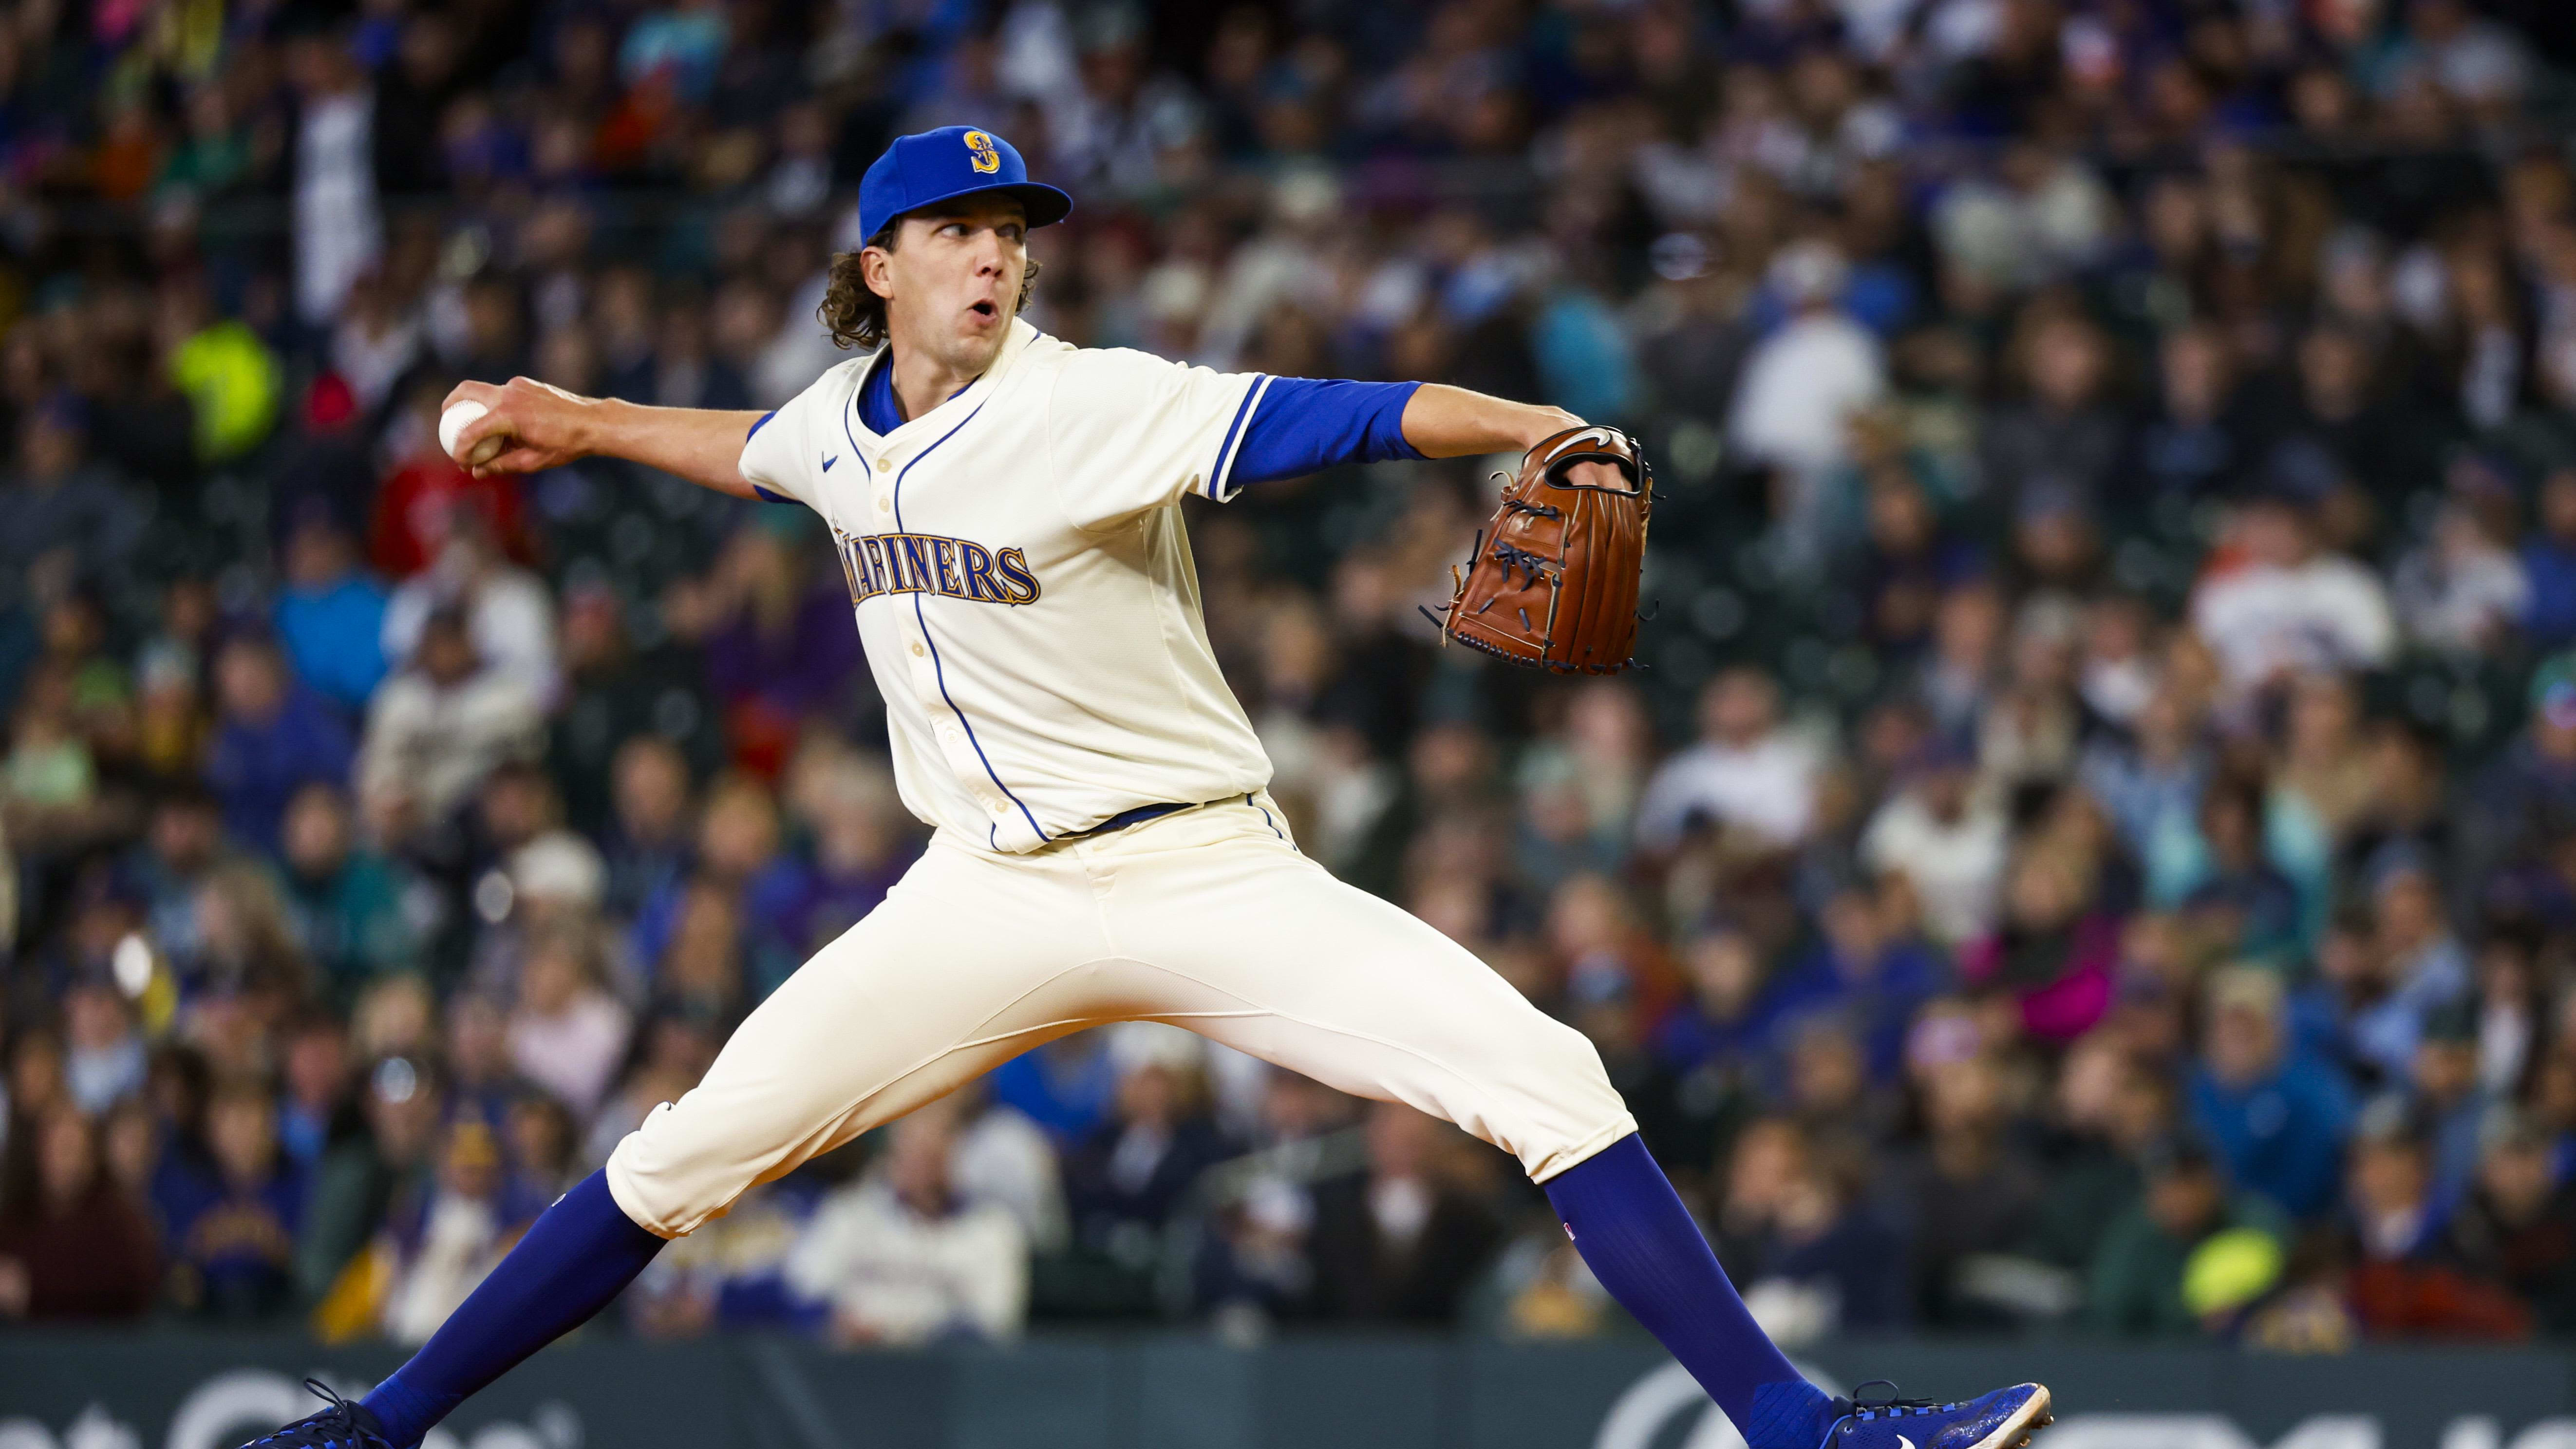 Seattle Mariners' Hurler Joins Elite Names in Team History With of Electric Start